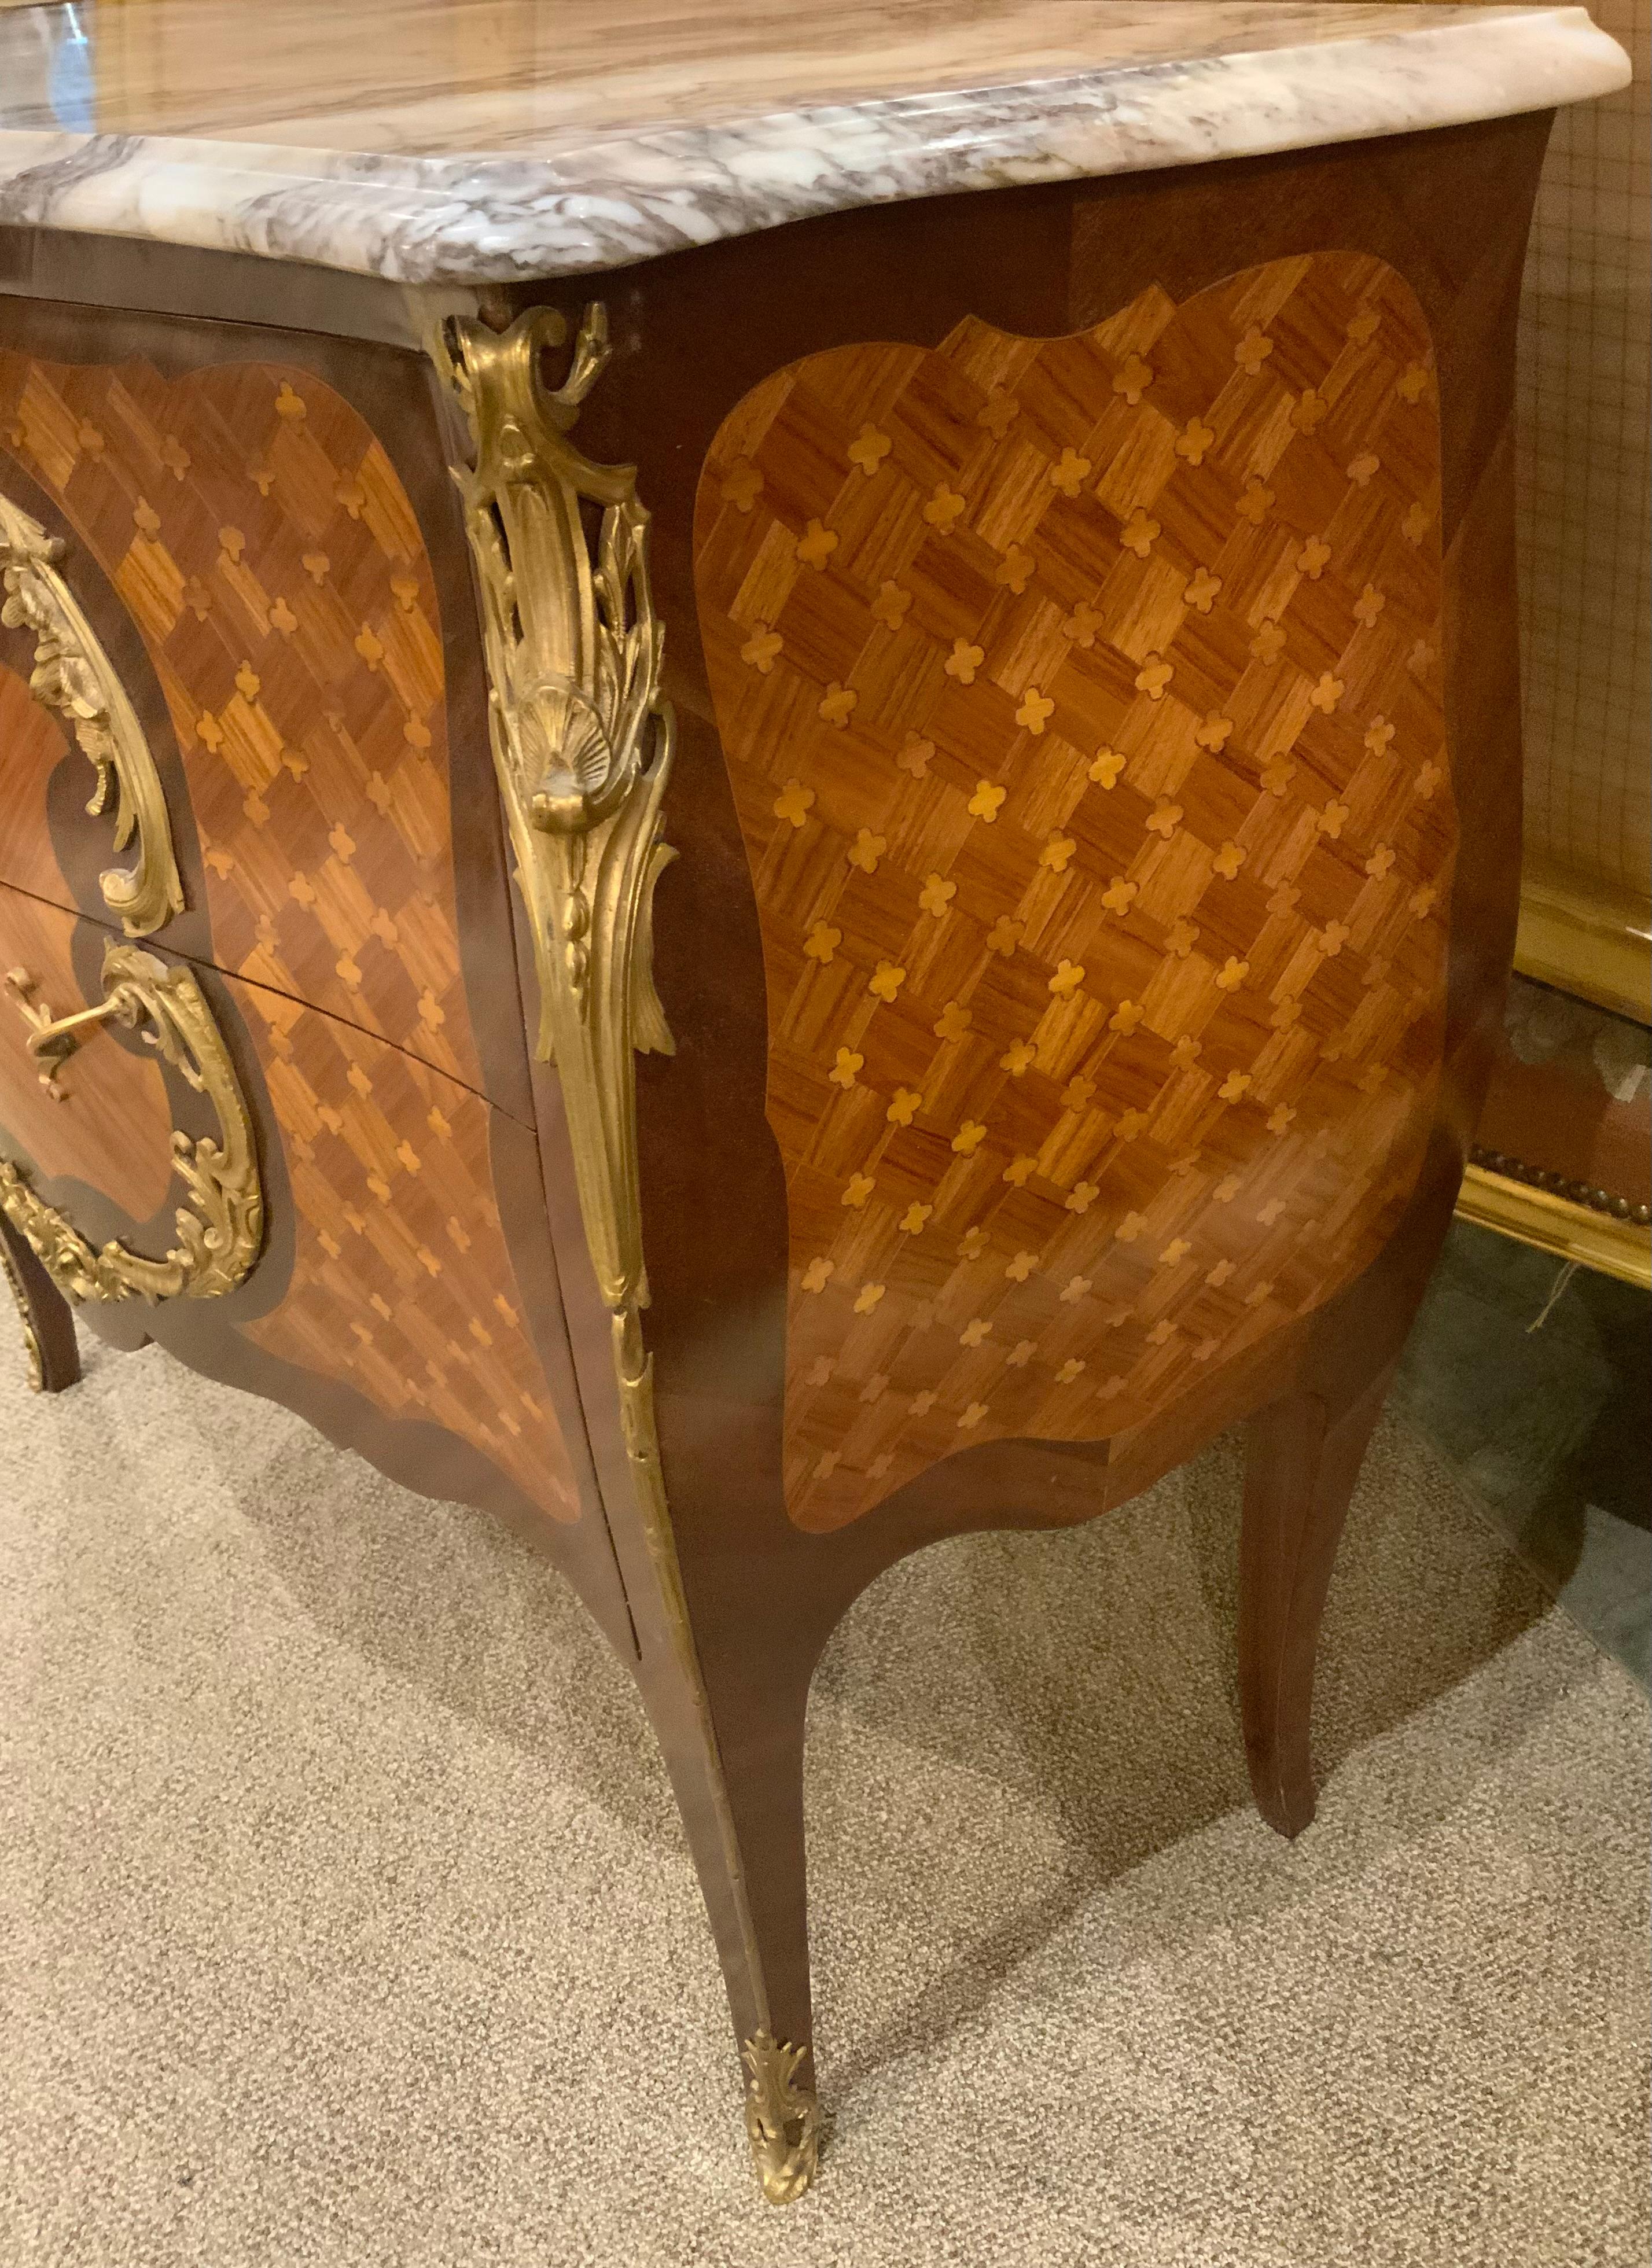 The fine workmanship demonstrated in the fine marquetry 
Makes this piece especially fine. The bronze mounts are
Well cast and have a brilliant gilt hue. The shaping of this
Piece is graceful with curved sides in a bombe form.
The color of the